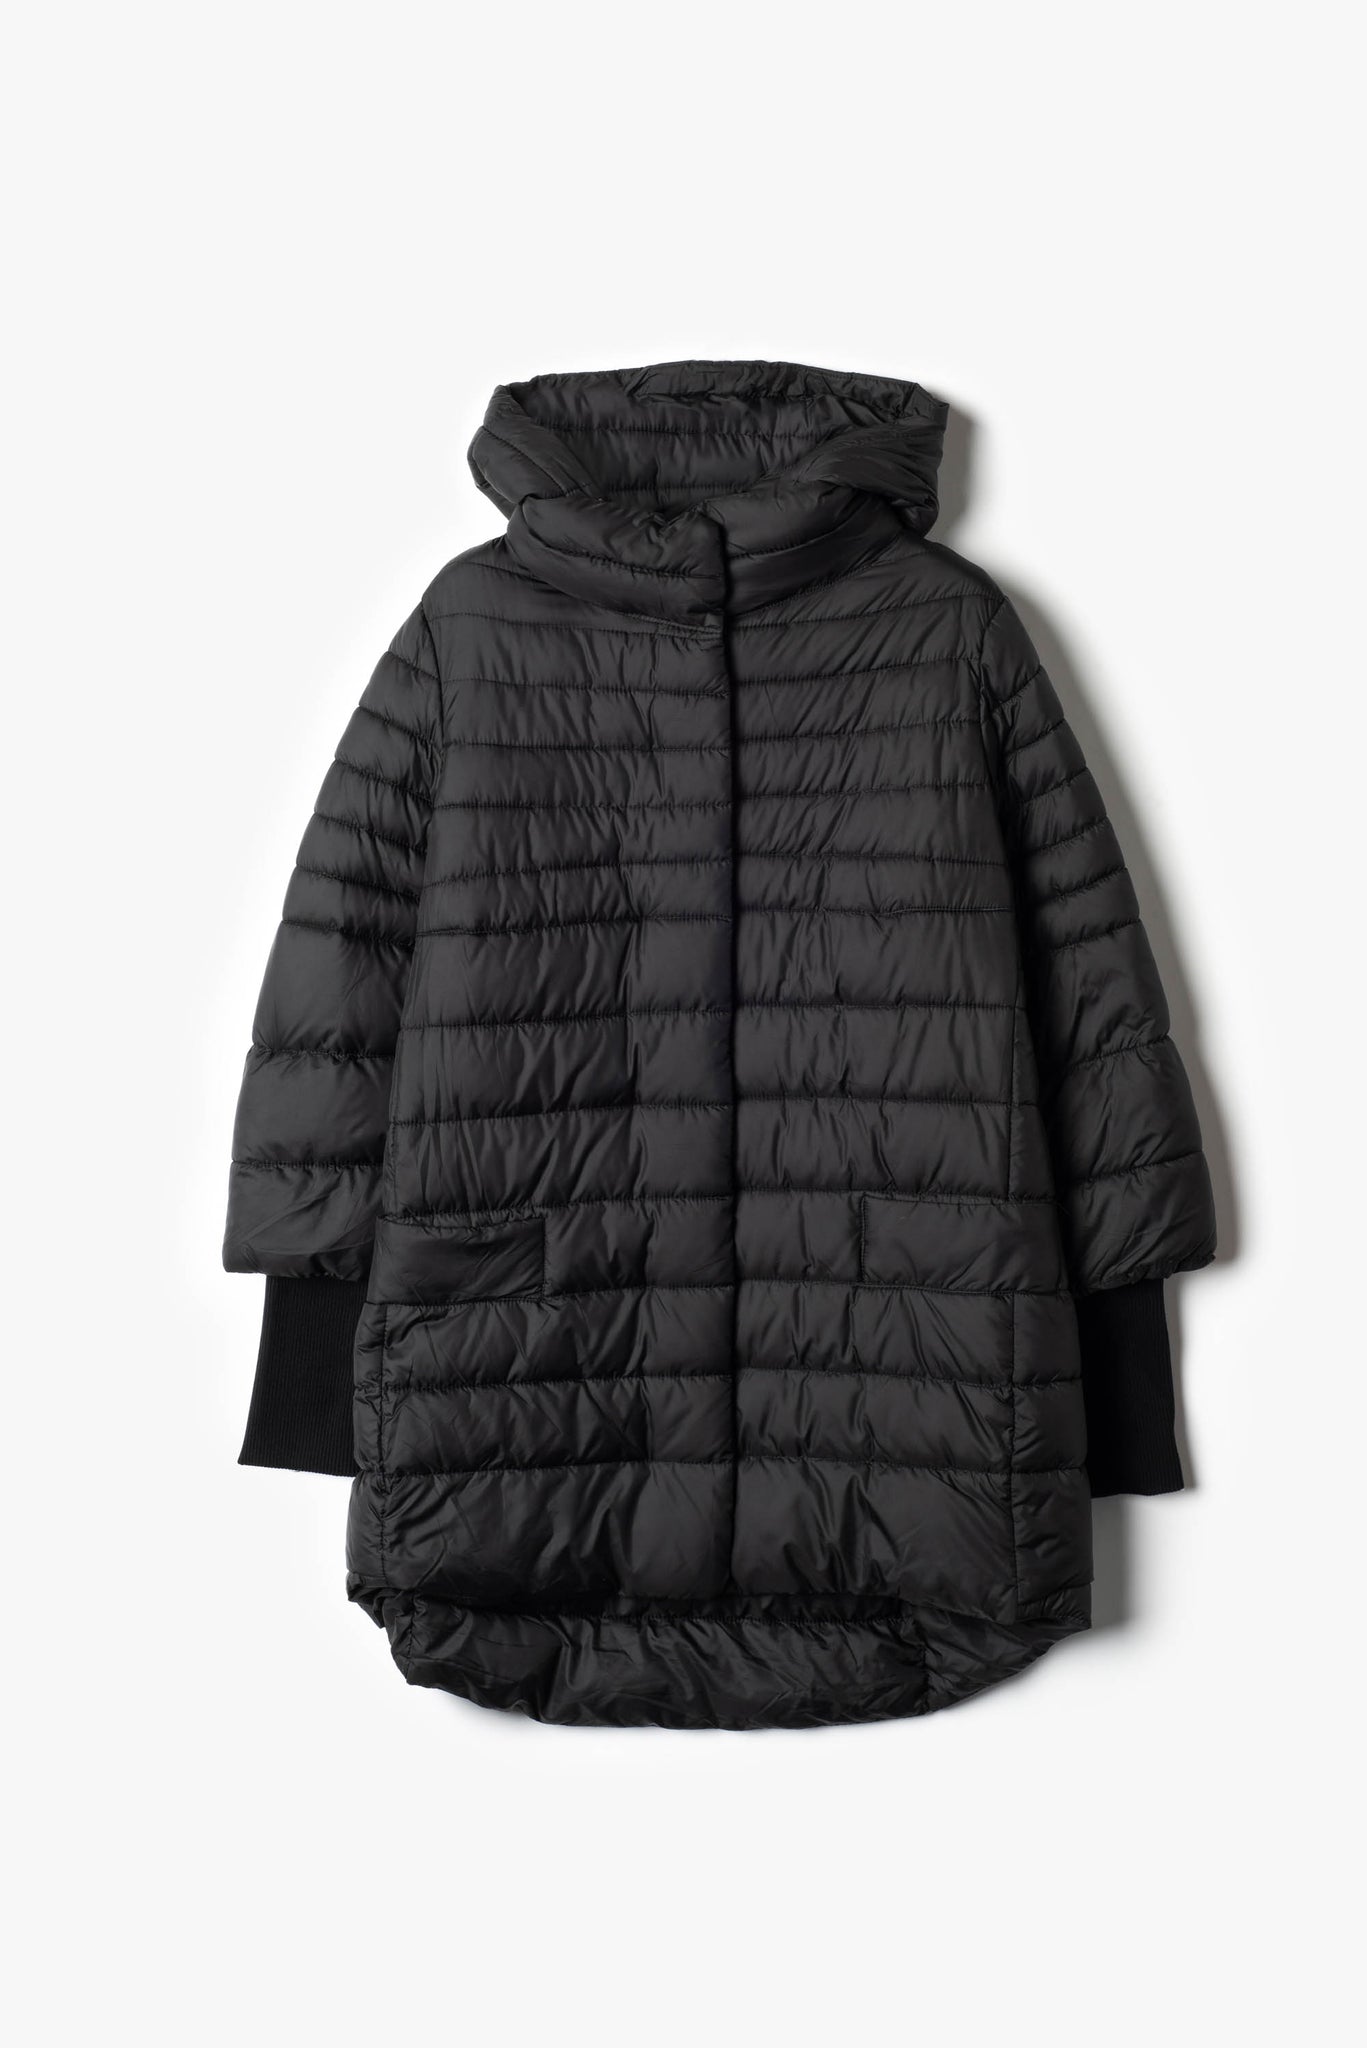 Down jacket with hood.